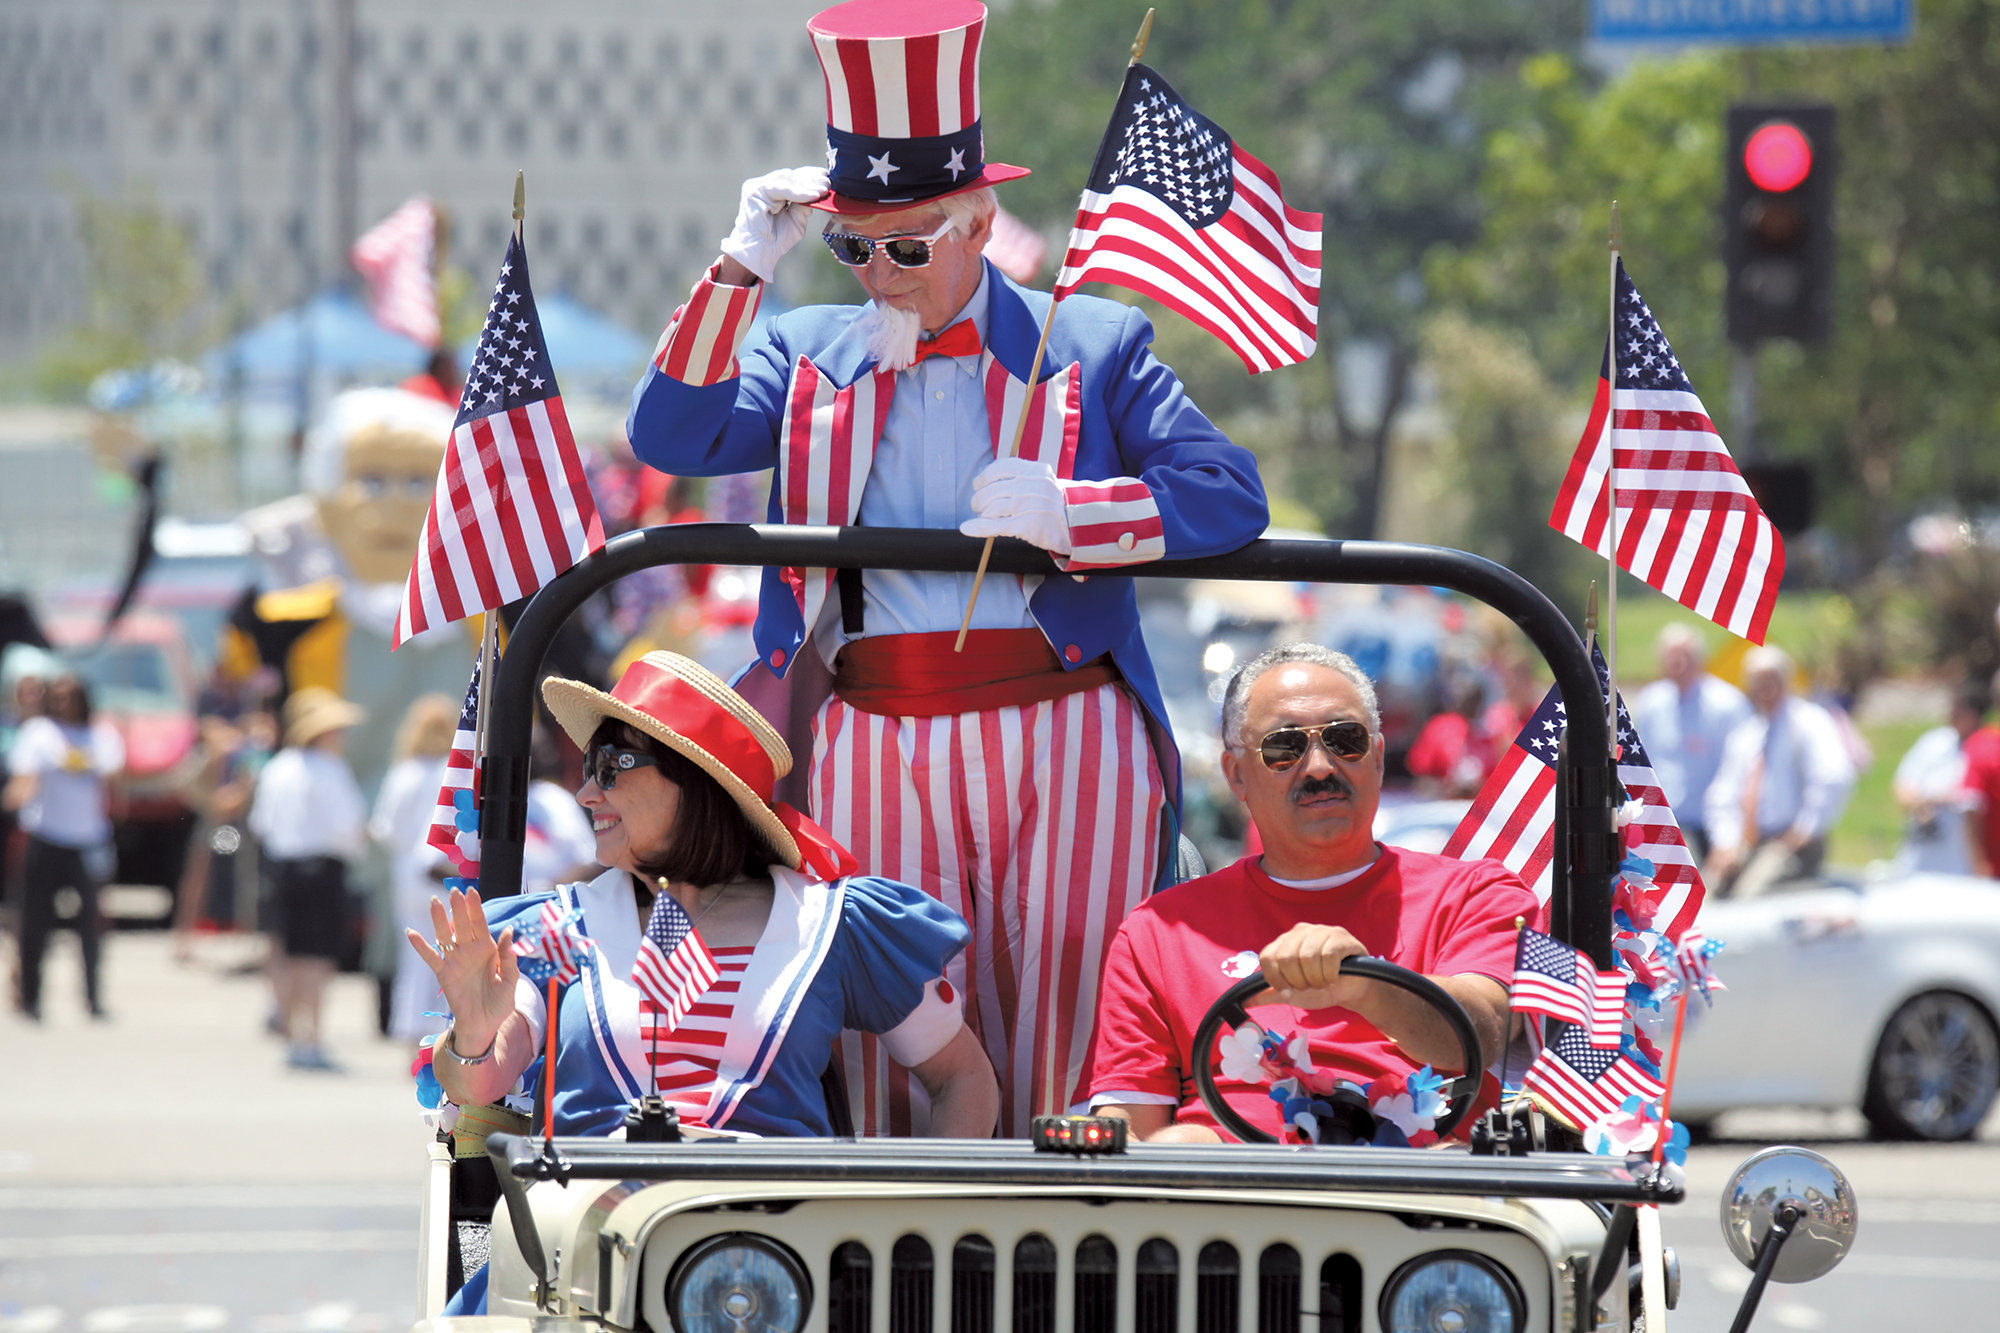 16th Annual Fourth of July Parade gets ready for an “American Beach Party”